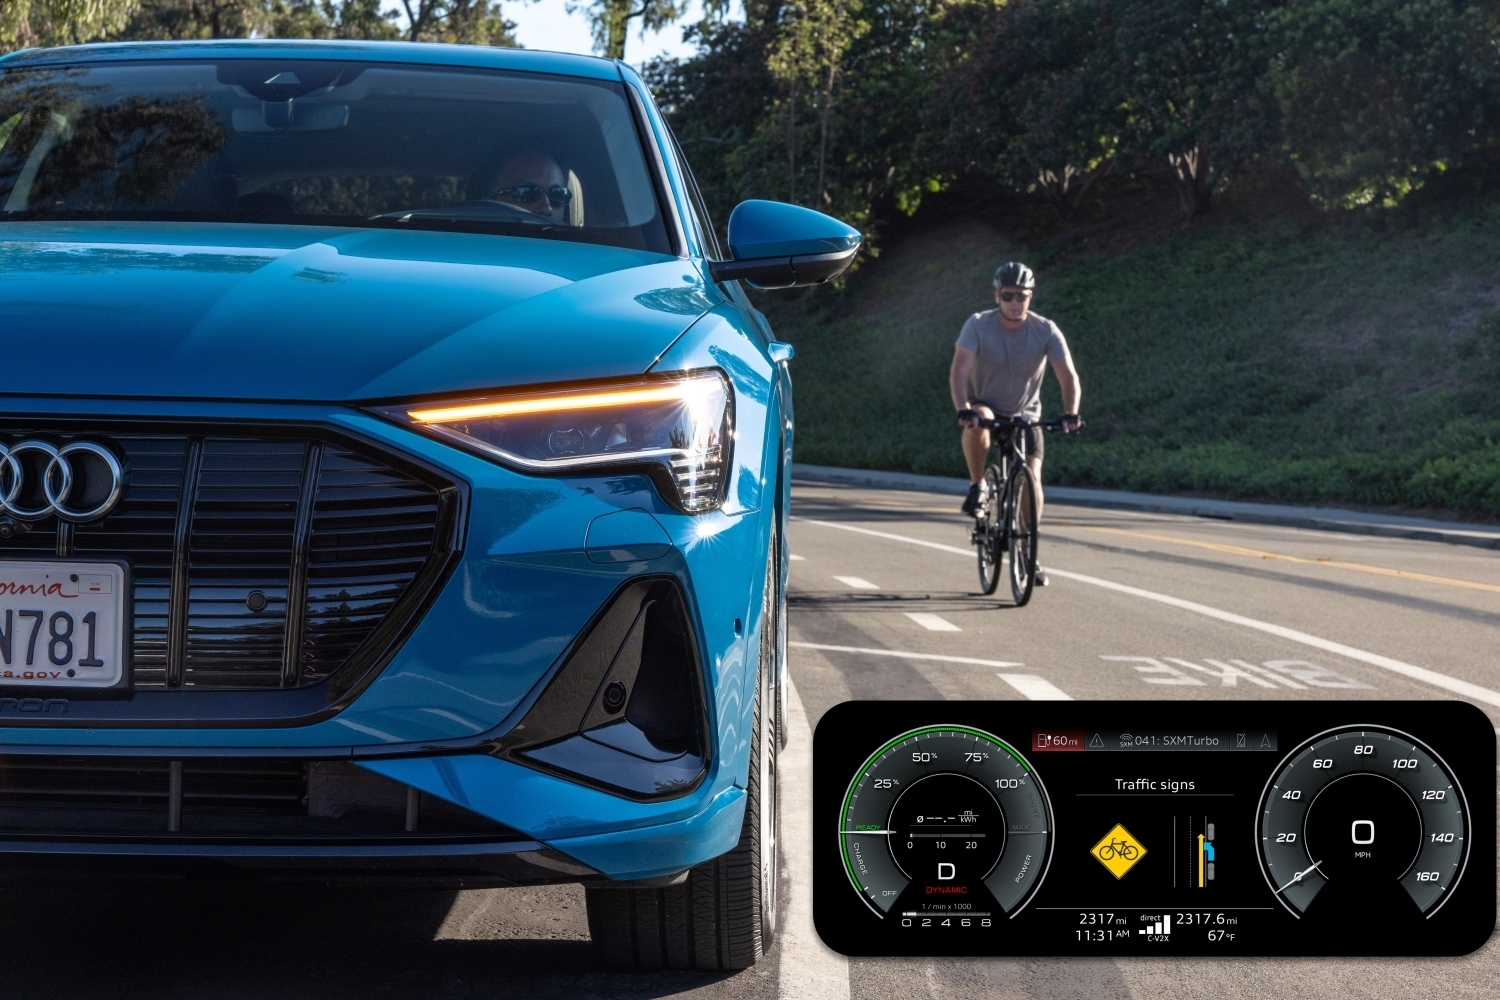 Audi C-V2X tech designed to help drivers safely interact with cyclists